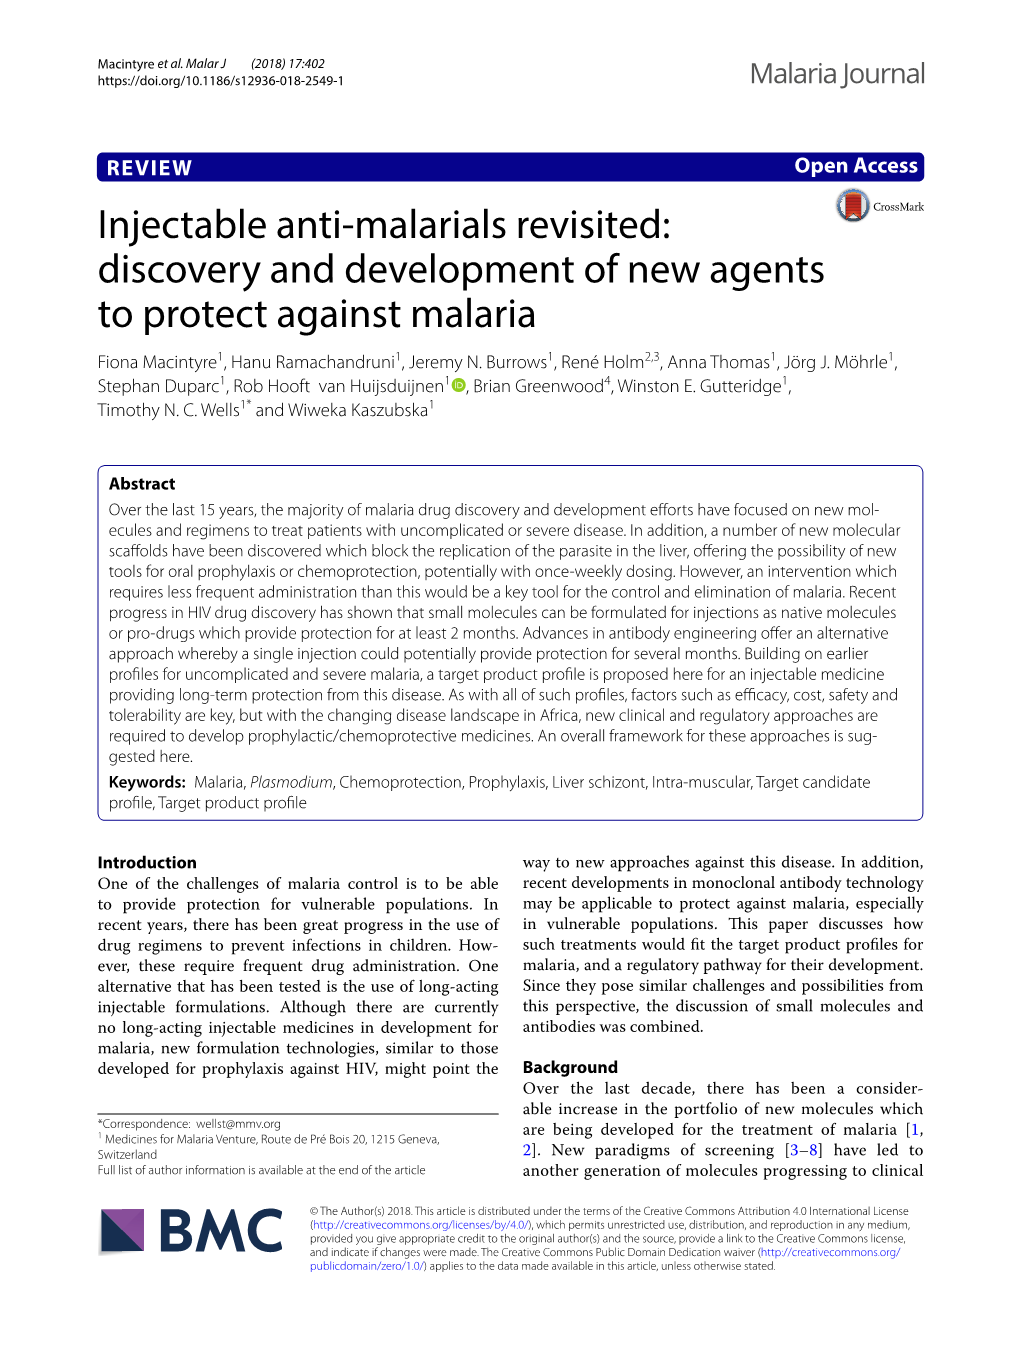 Injectable Anti-Malarials Revisited: Discovery and Development of New Agents to Protect Against Malaria